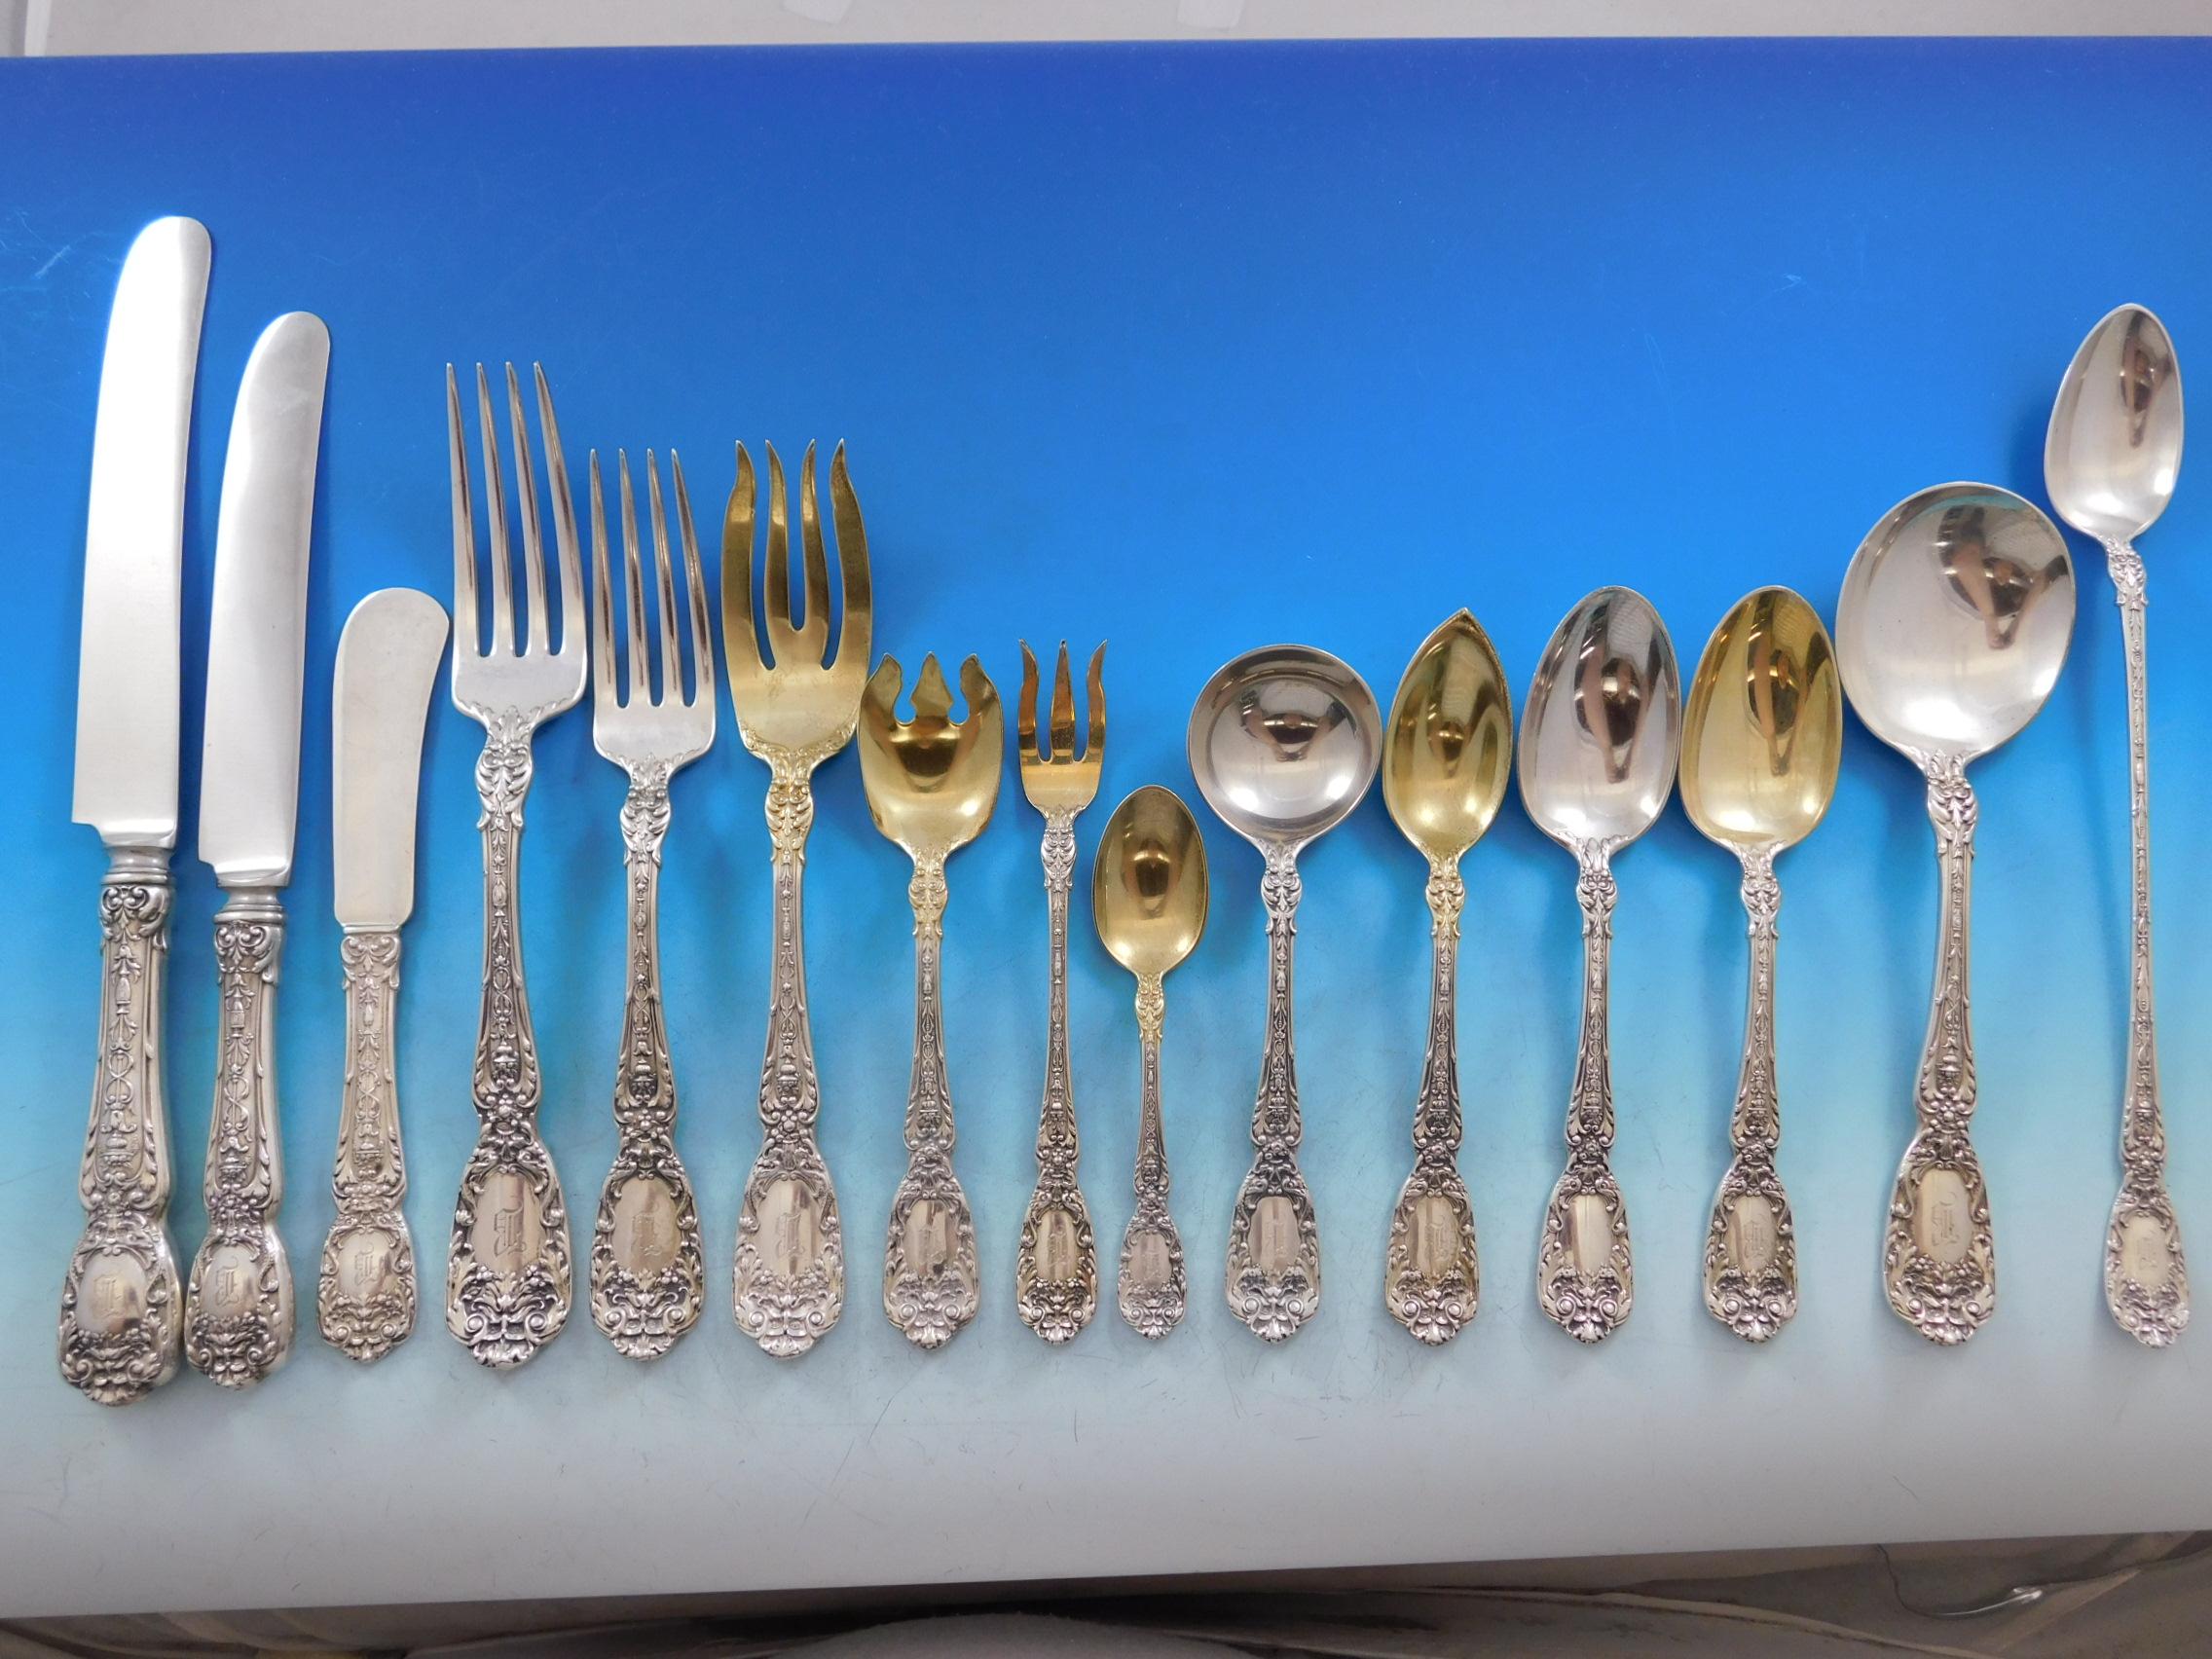 Monumental figural Florentine by Gorham sterling silver Flatware set - 426 pieces. This pattern was designed by William Codman and patented in 1901. It features the Greek God of North Wind. This set belonged to the Tutt family who built the